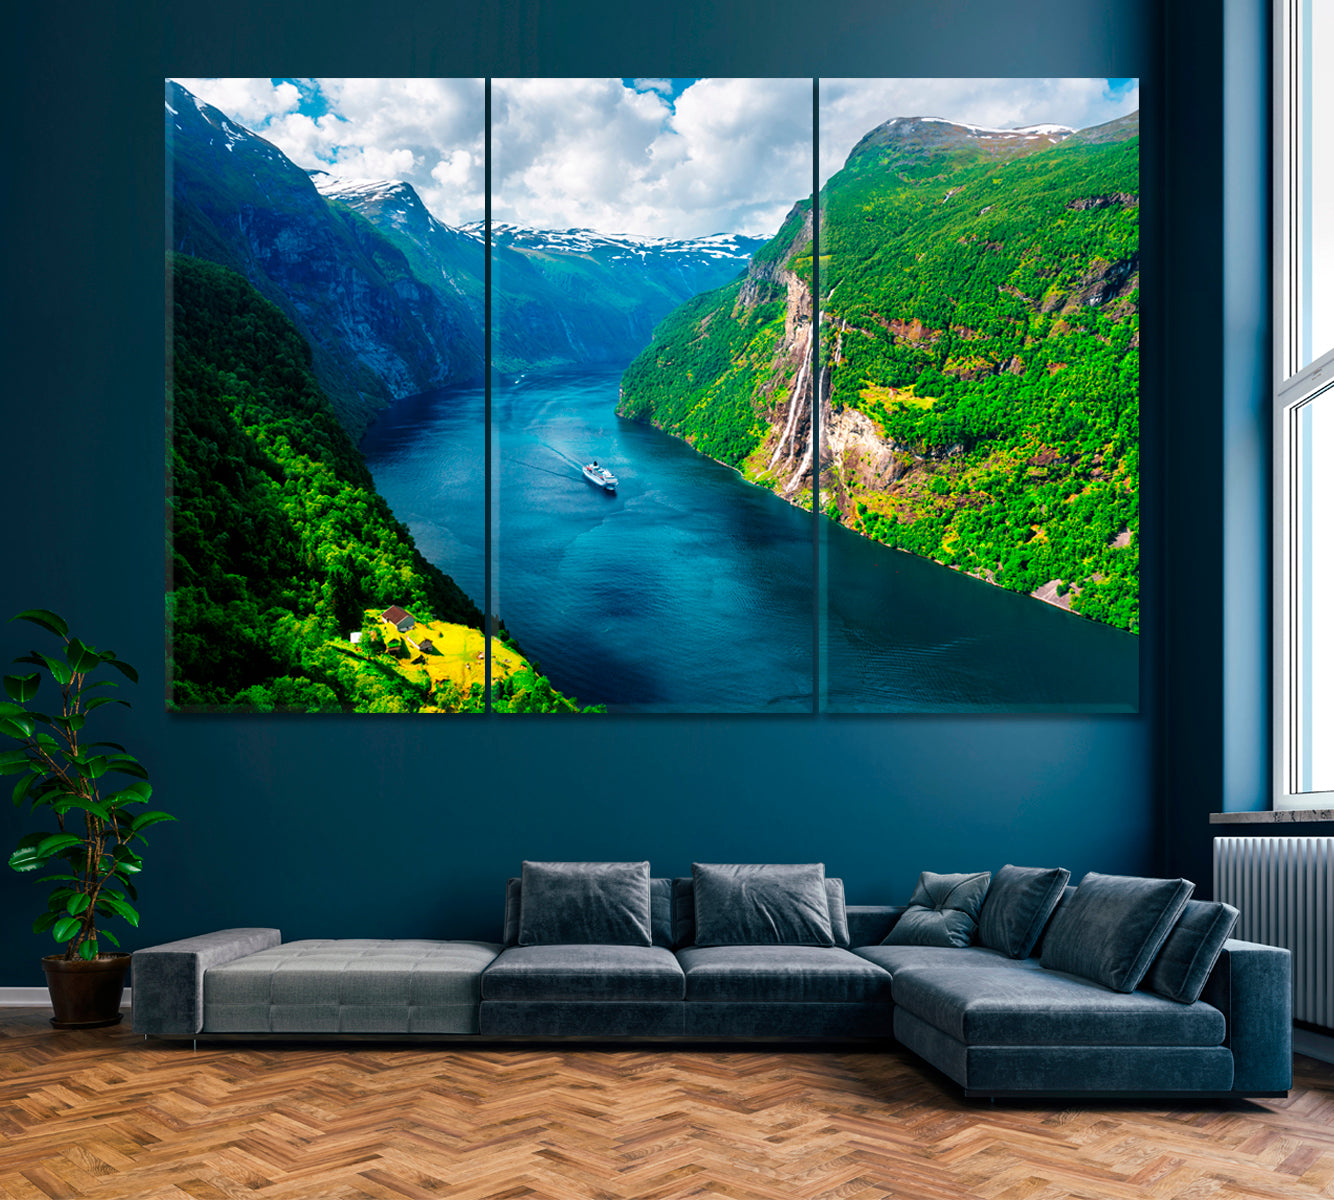 Sunnylvsfjorden Fjord and Seven Sisters Waterfalls Norway Canvas Print ArtLexy 3 Panels 36"x24" inches 